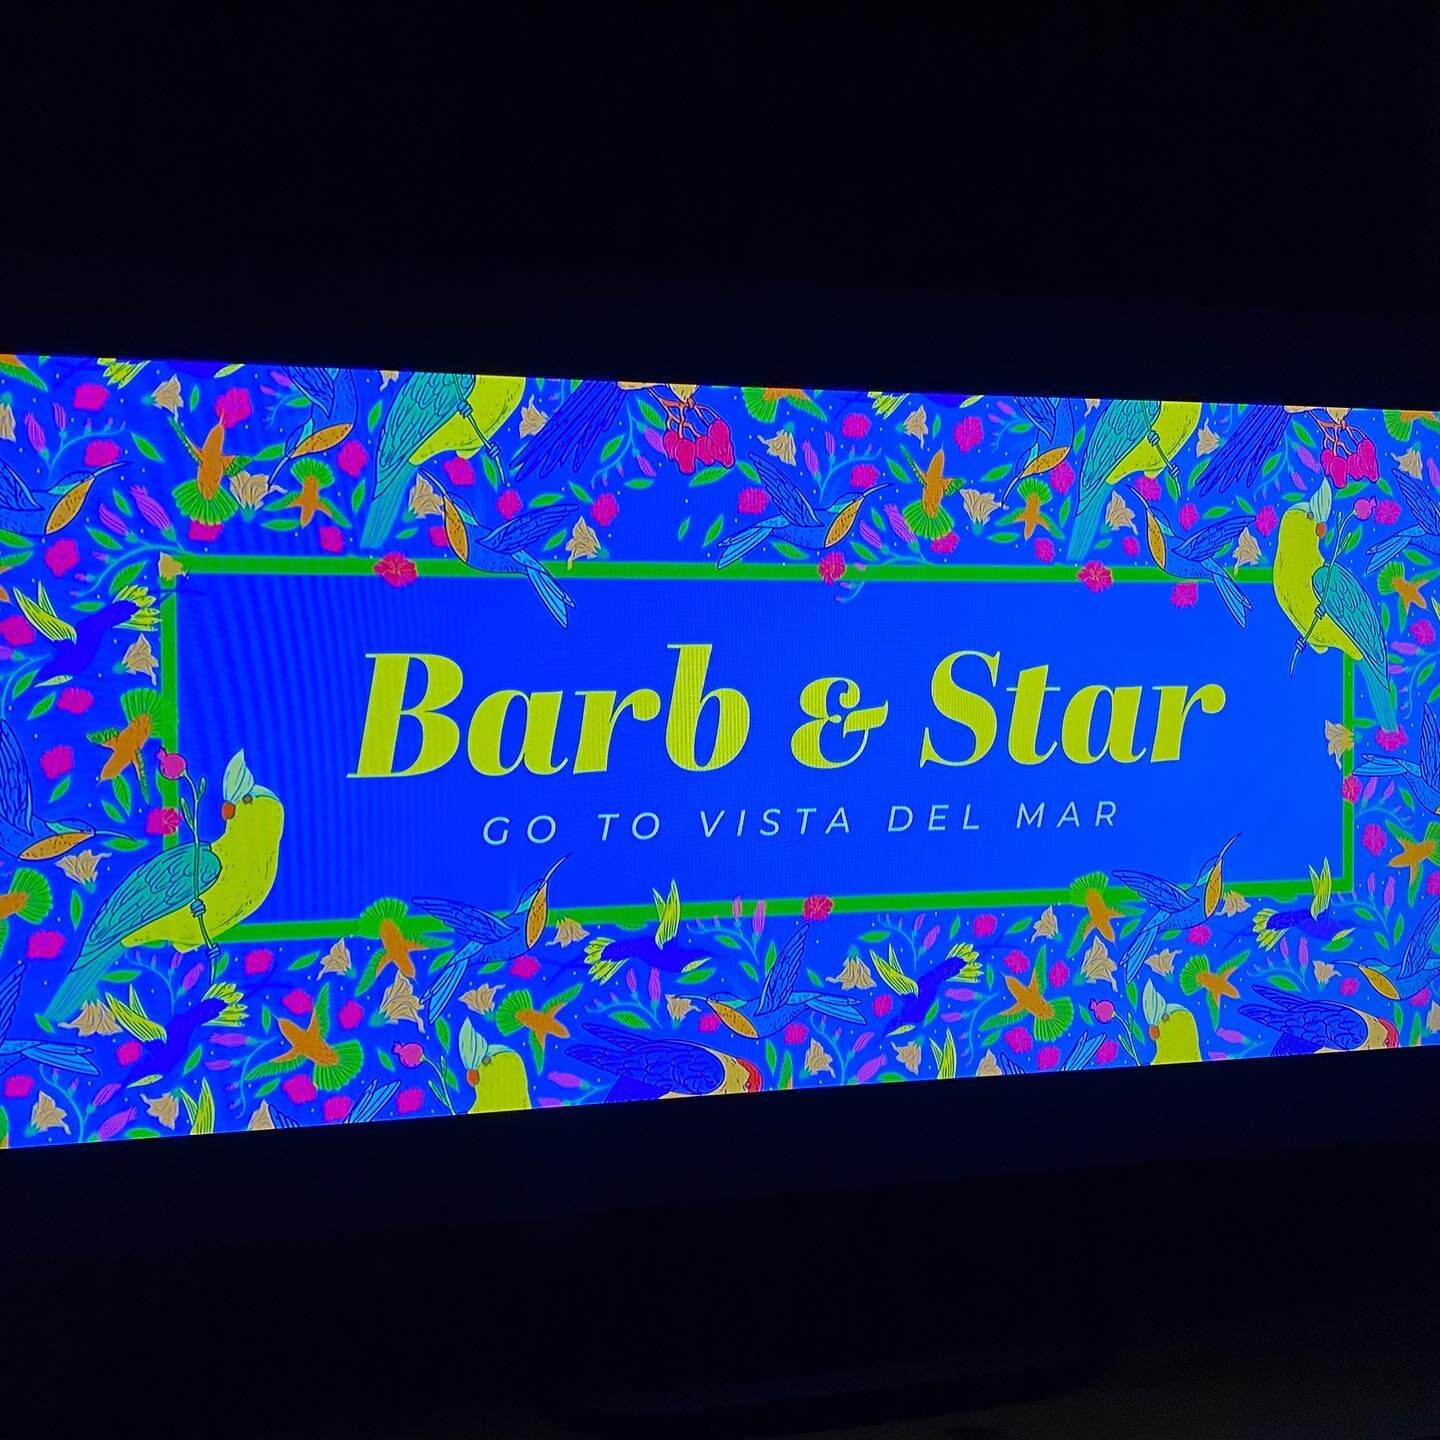 Thank you for existing when we need you the most, Barb and Star.